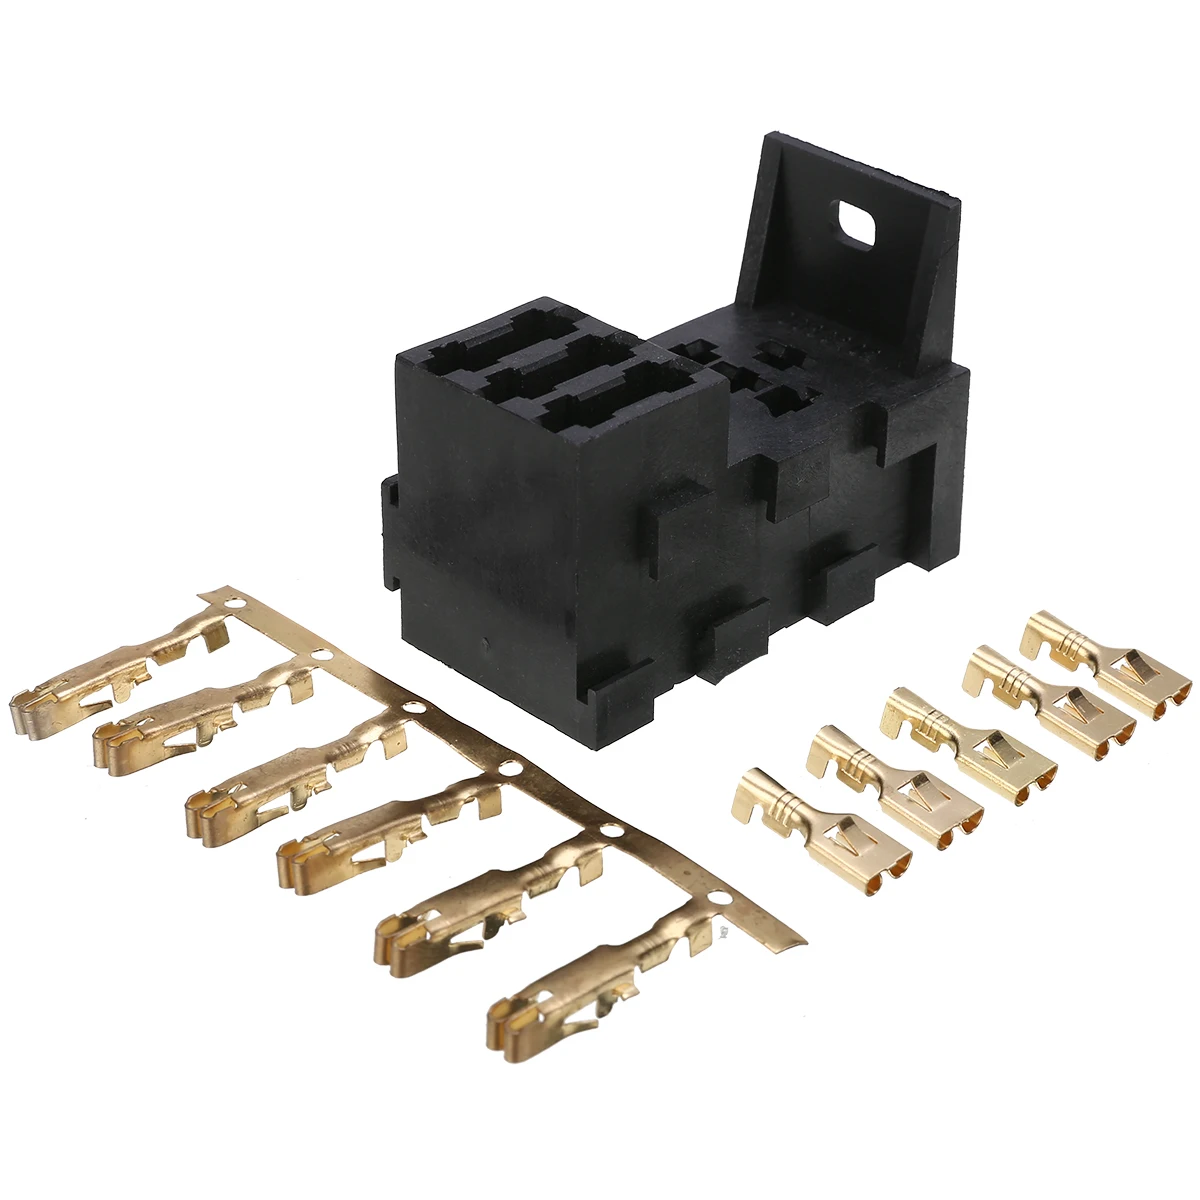 Relay Base Holder 5 Terminals Suitable for 4/5 Pin Relays